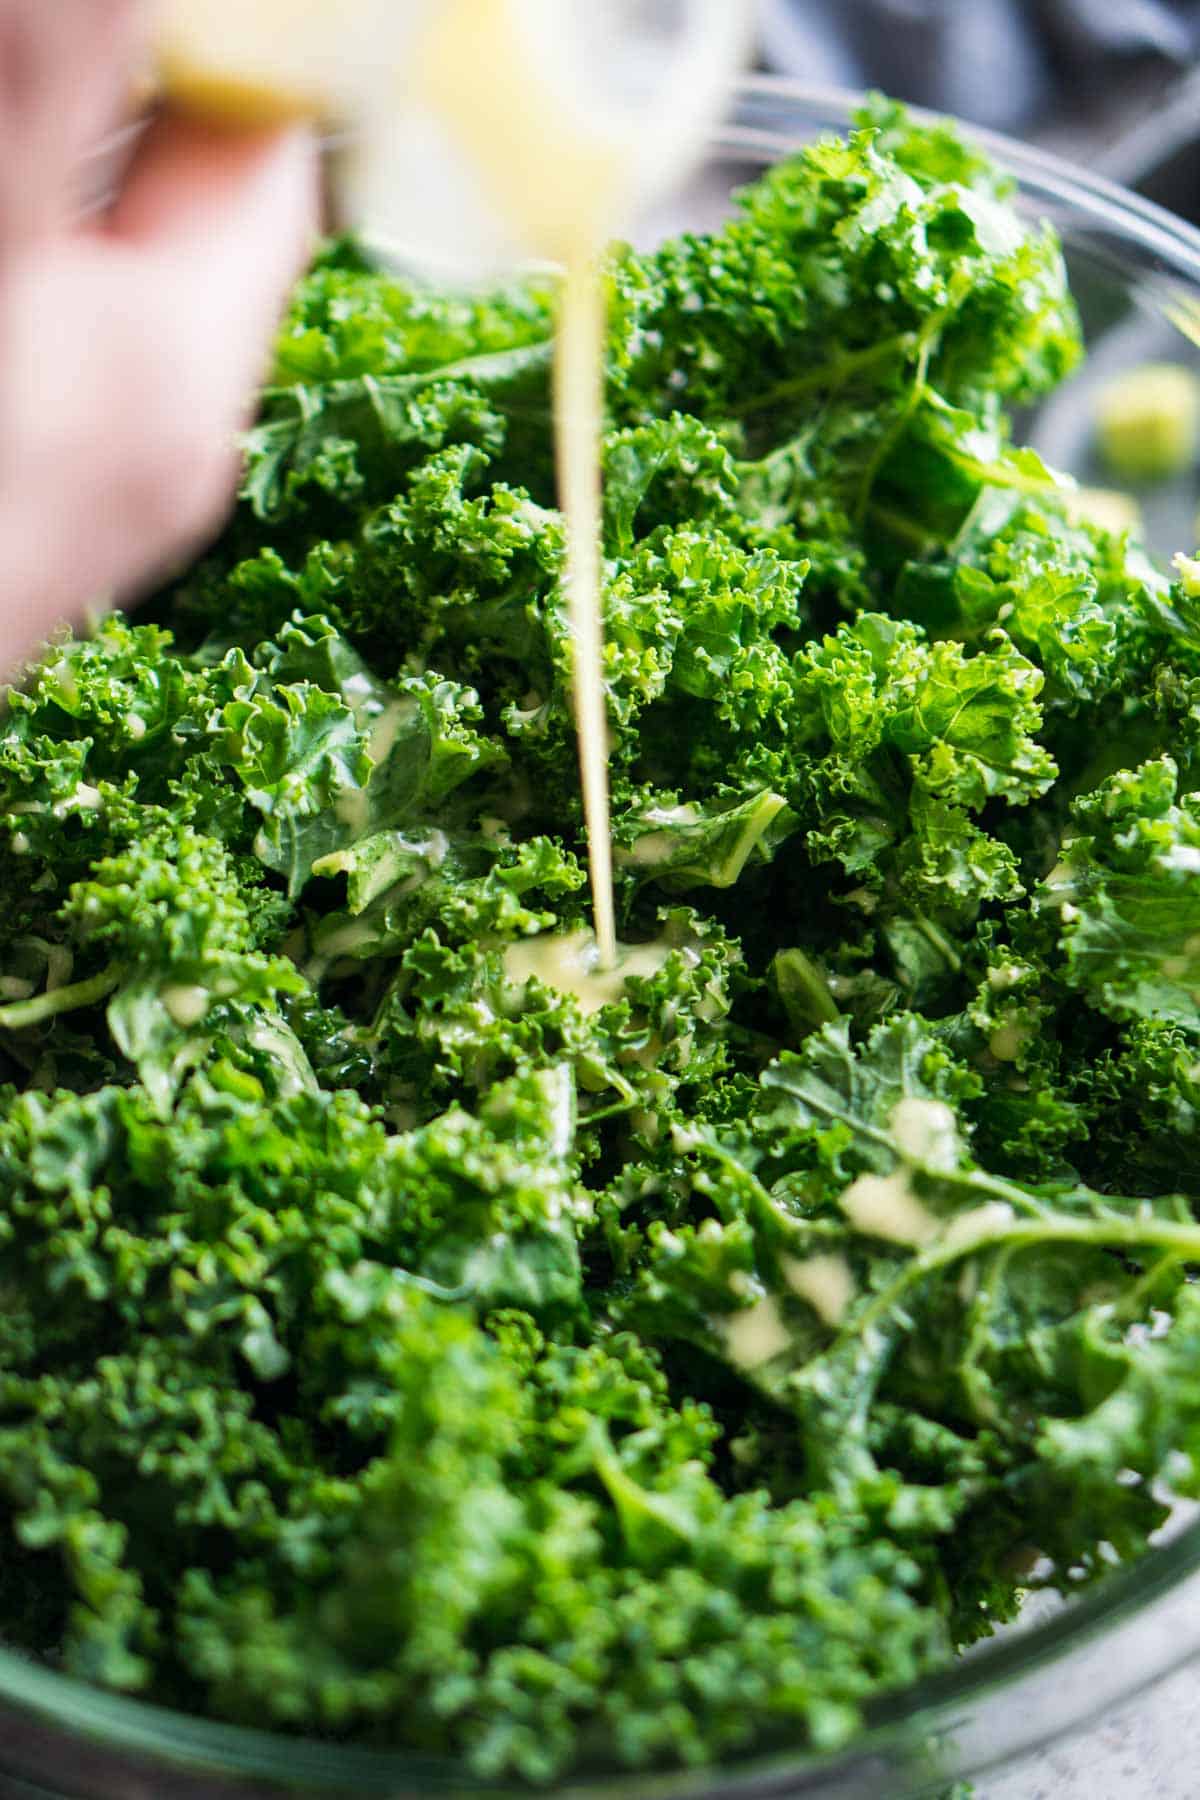 lemon dressing is added to kale in mixing bowl